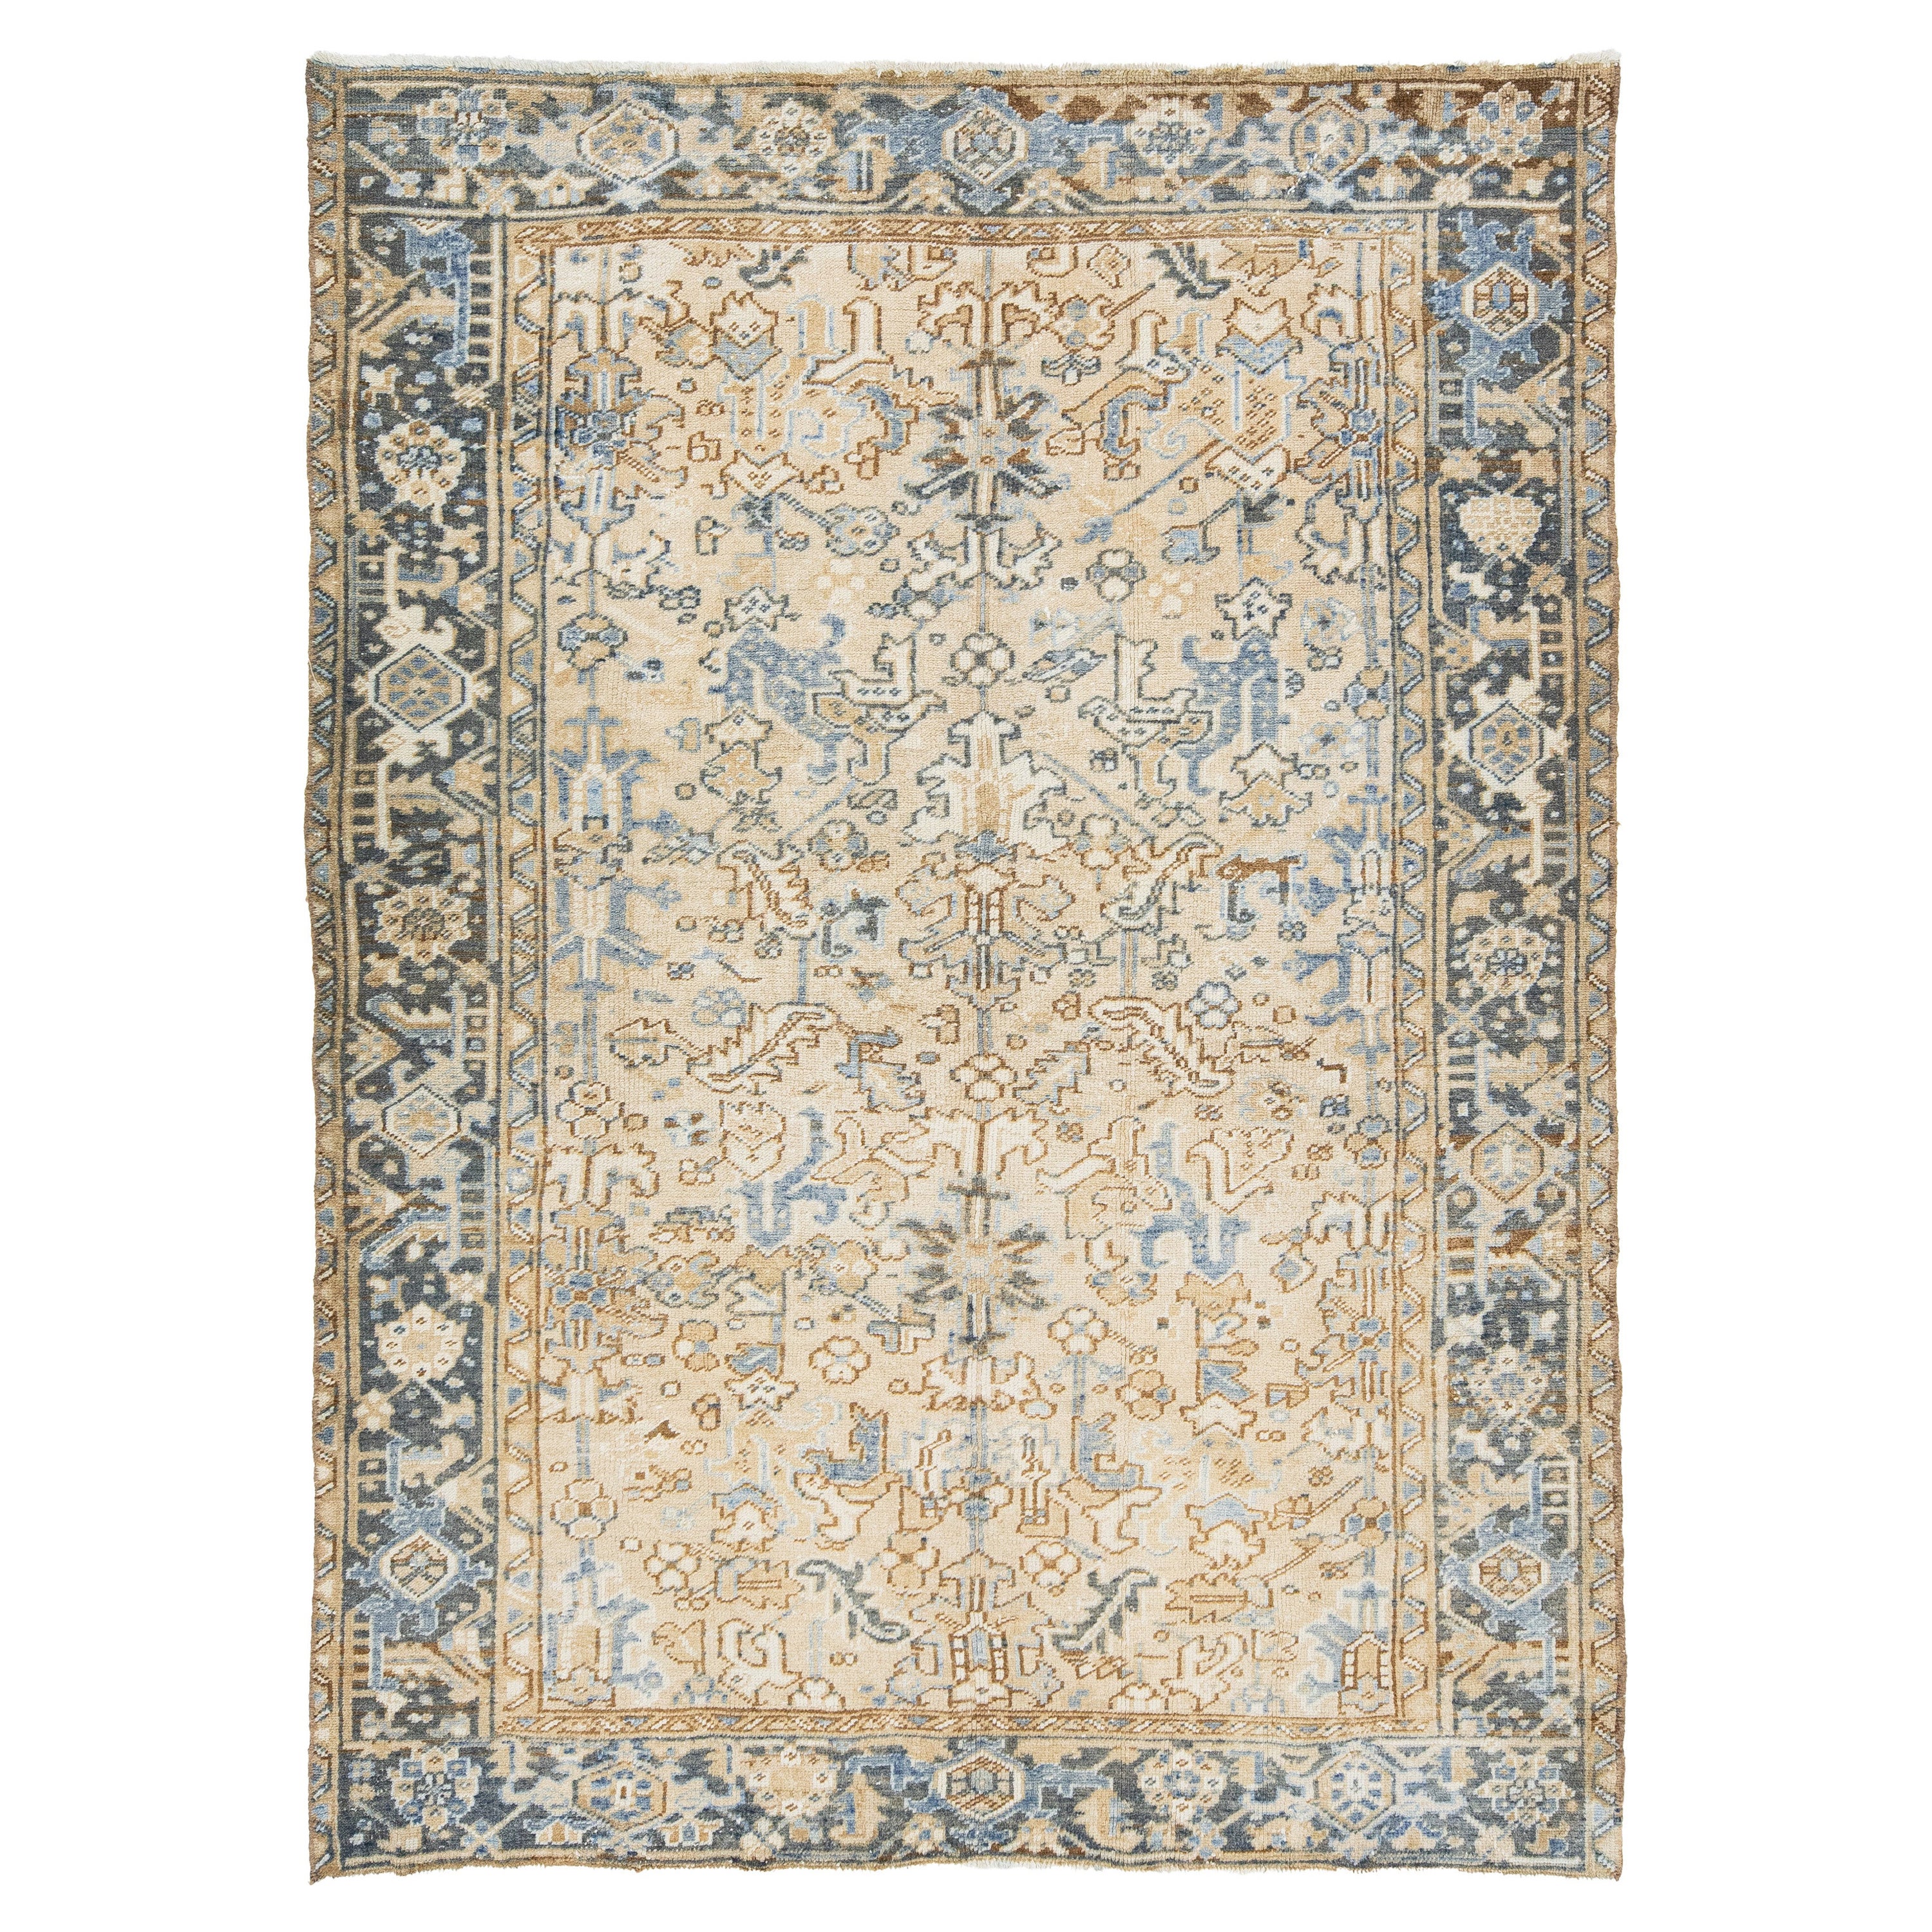 Antique Allover Persian Heriz Wool Rug In Beige and Blue